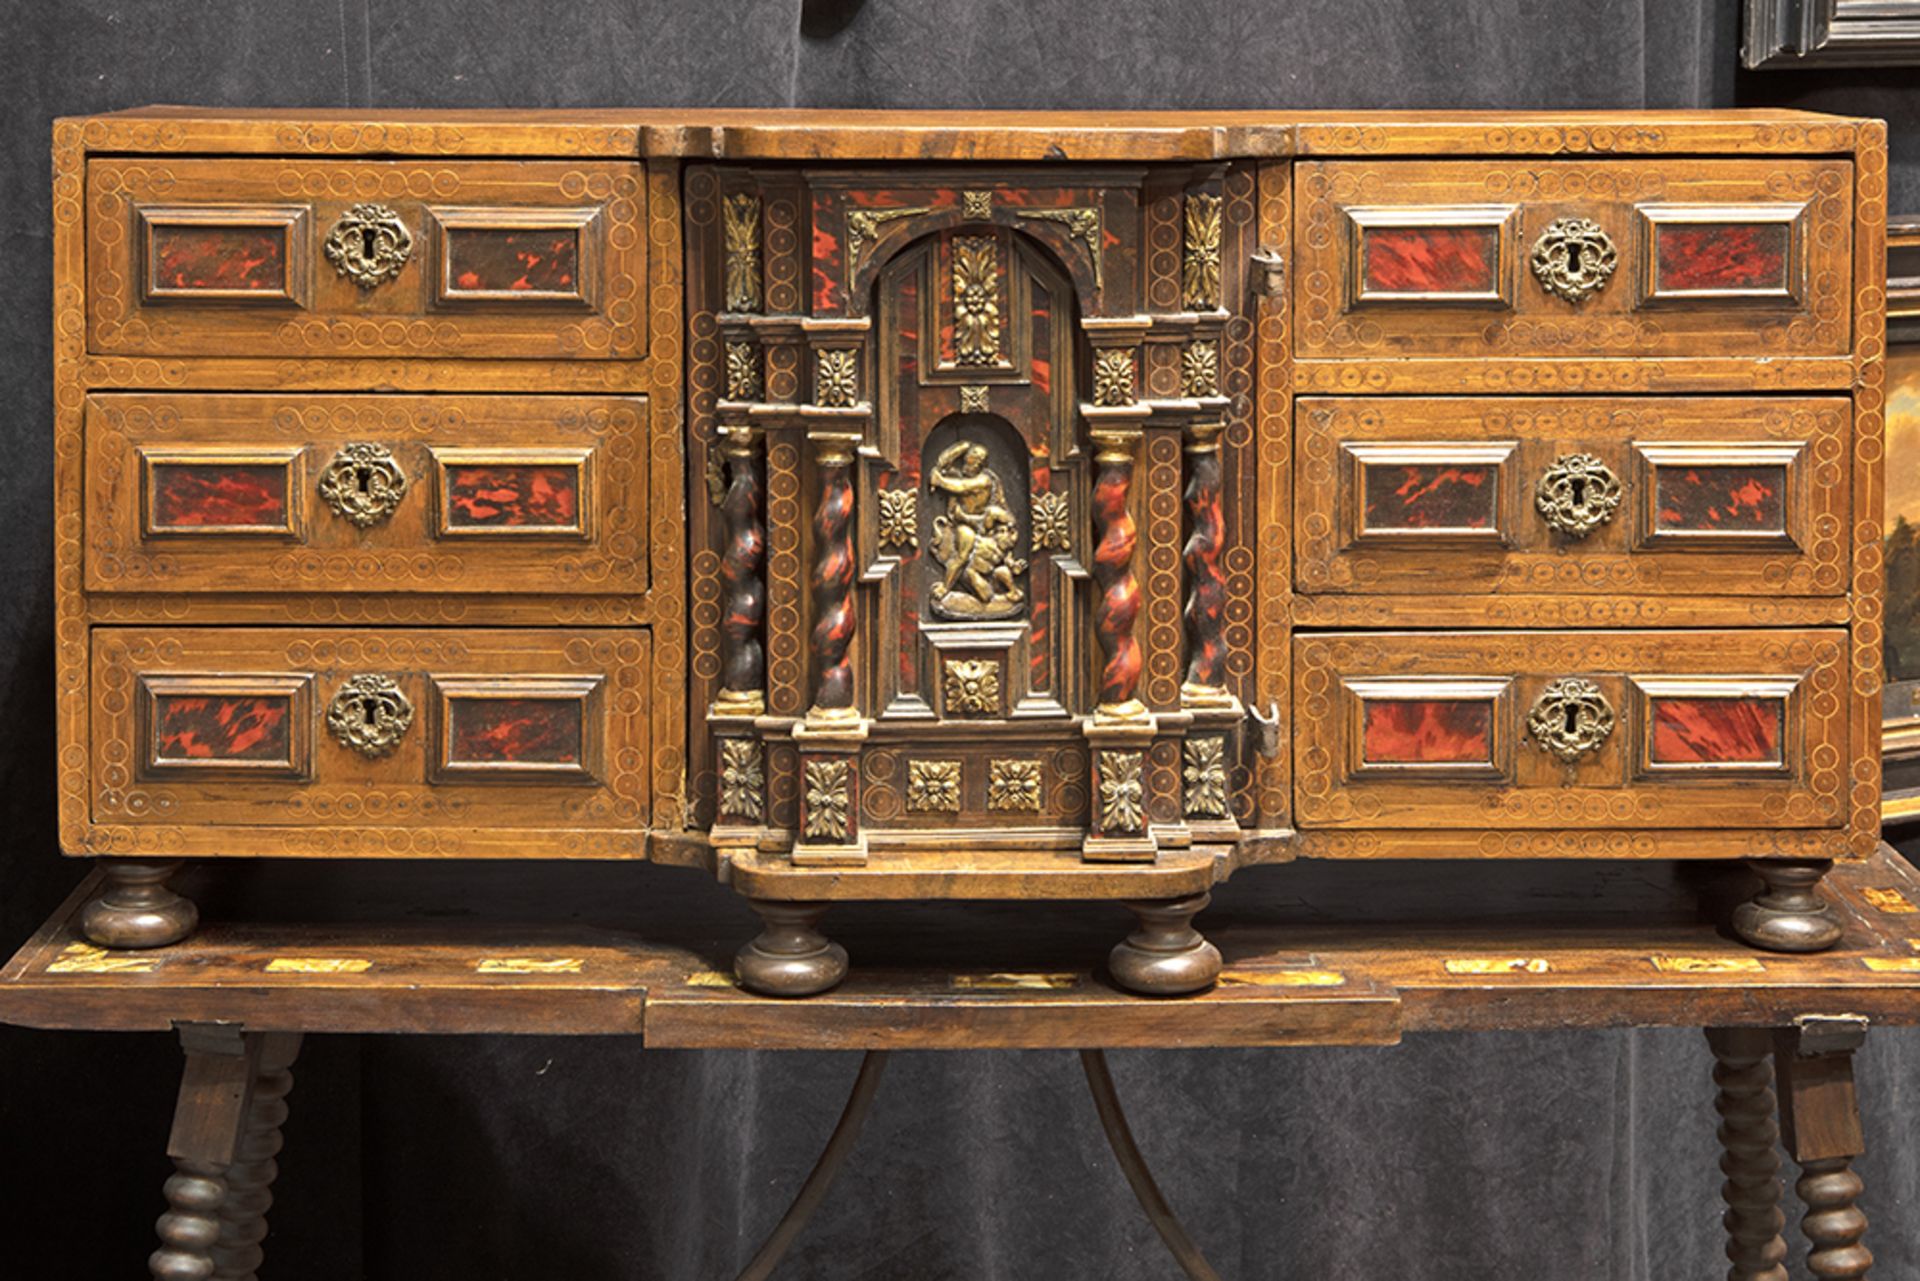 18th Cent. Spanish cabinet in walnut and tortoiseshell sold with an antique Spanish "puente" table - Image 3 of 3